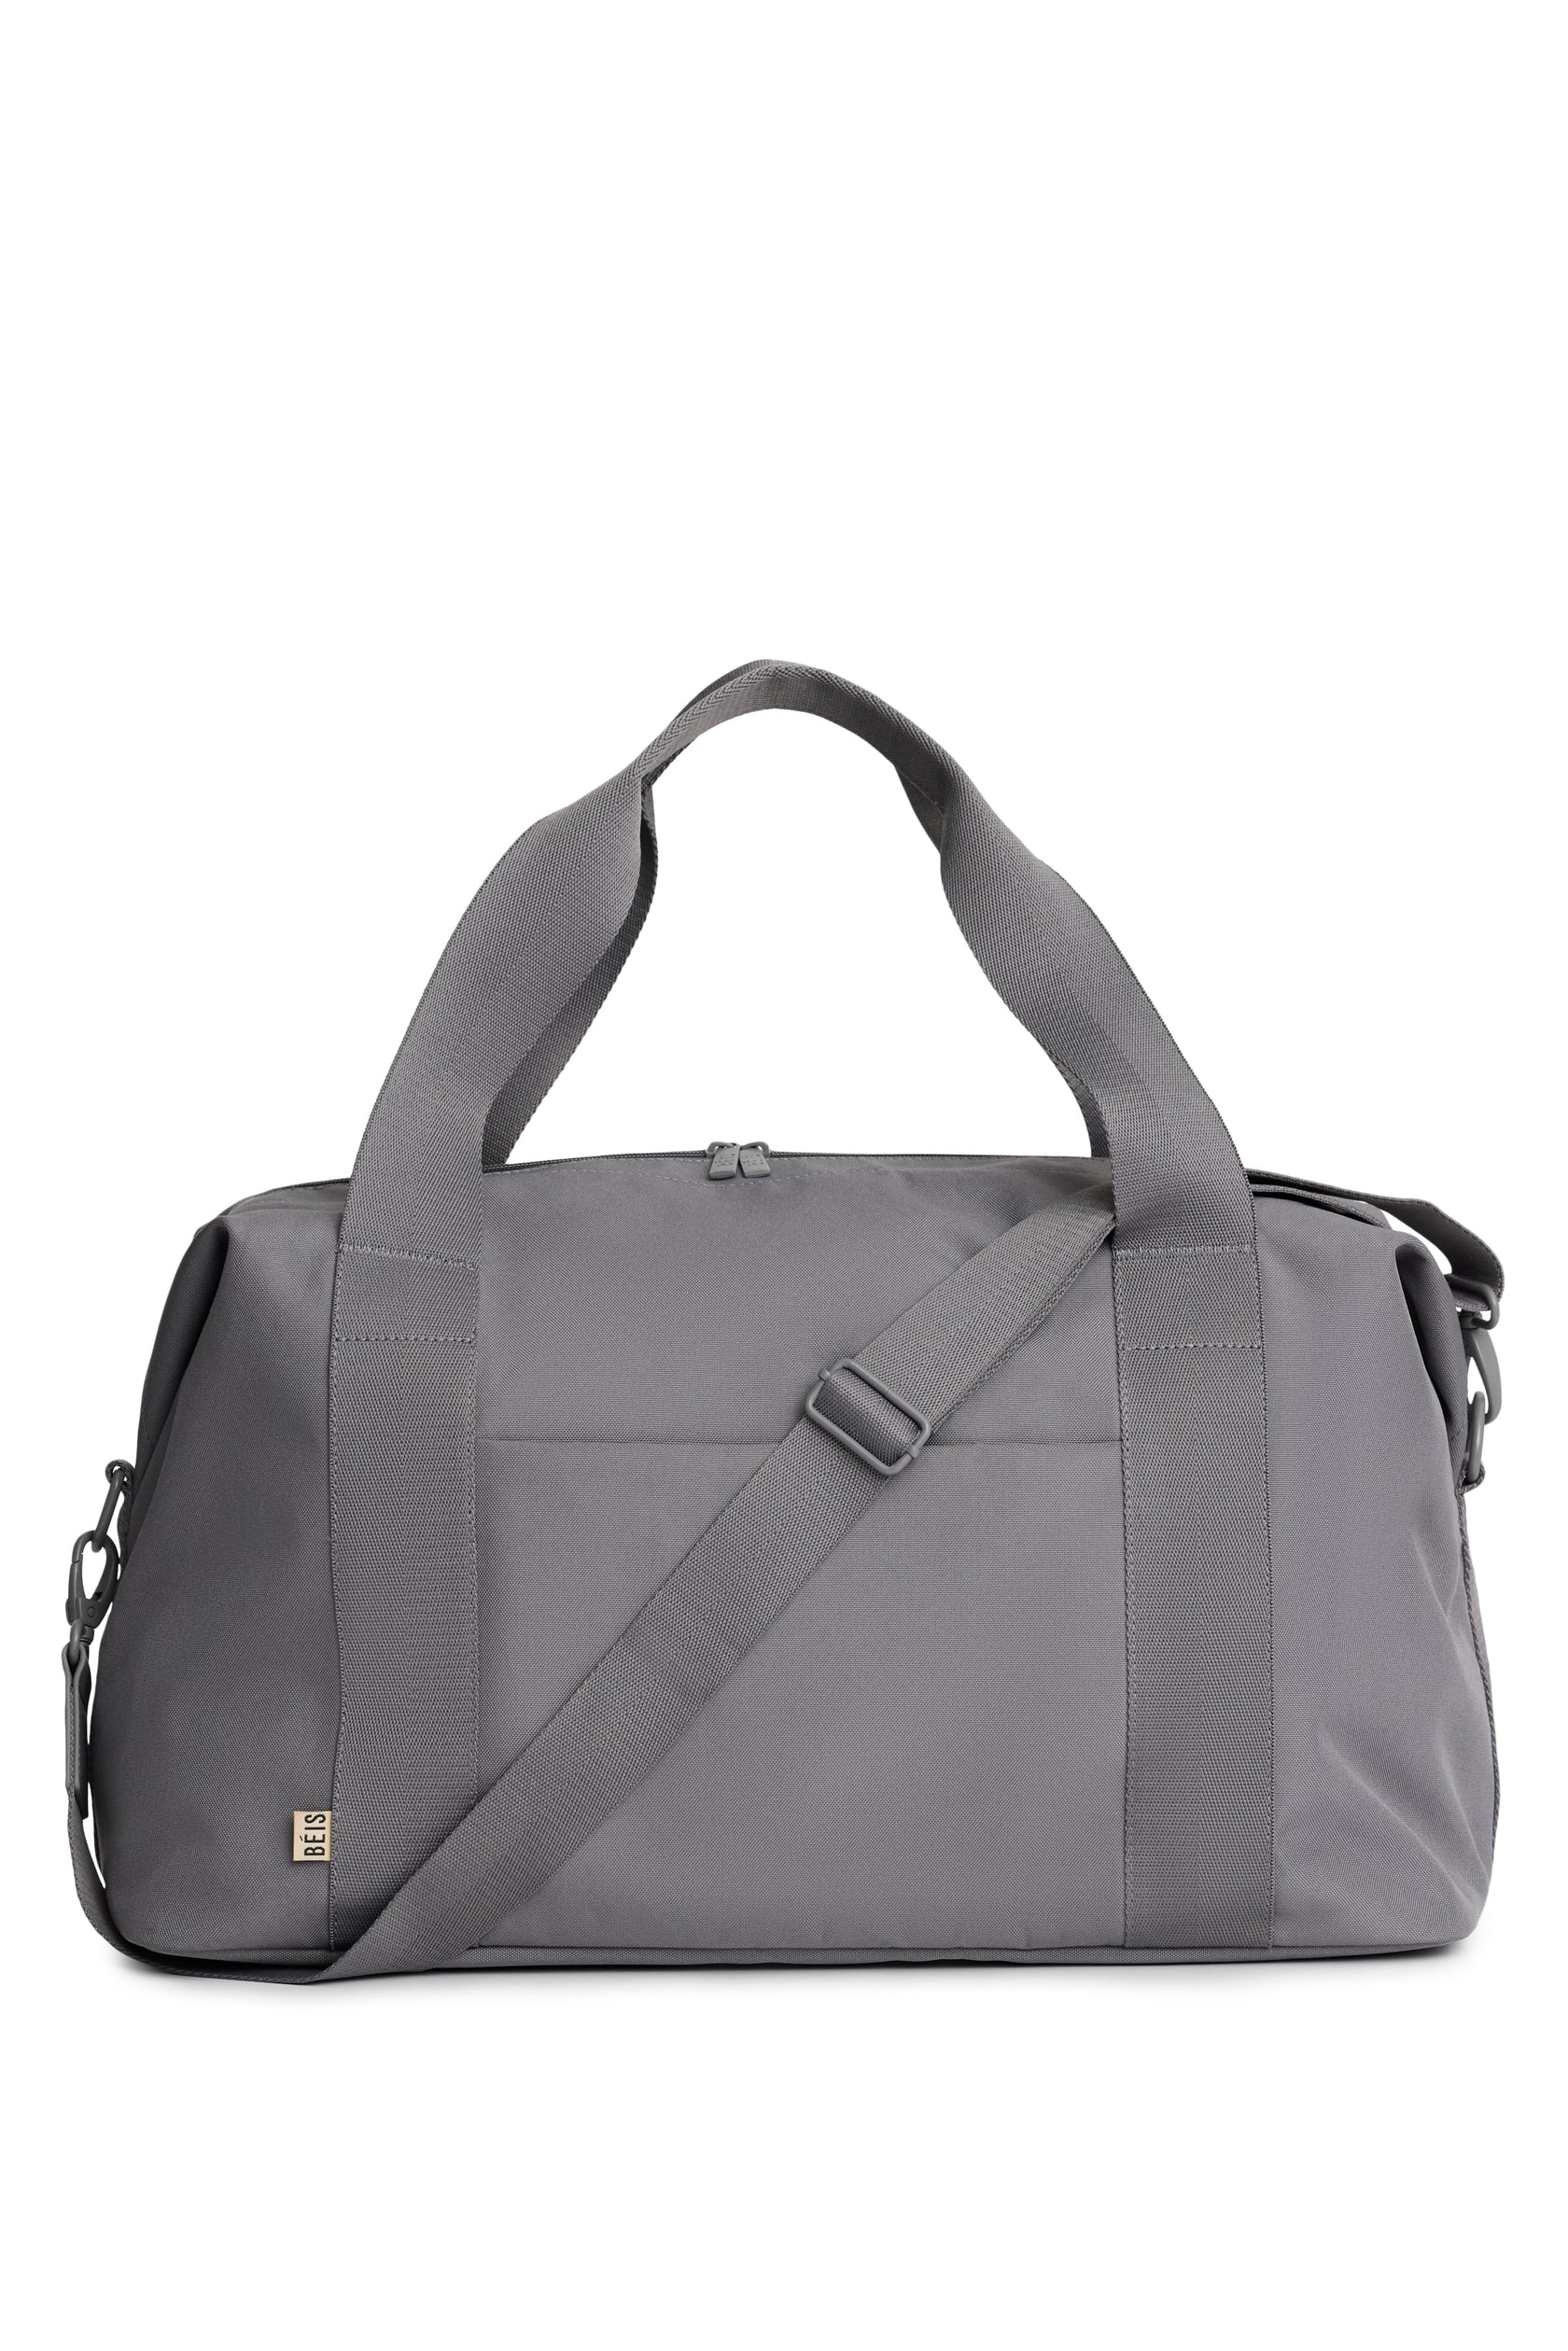 BÉIS 'The BEISICS Duffle' in Grey - Large Travel Duffle Bag in Grey